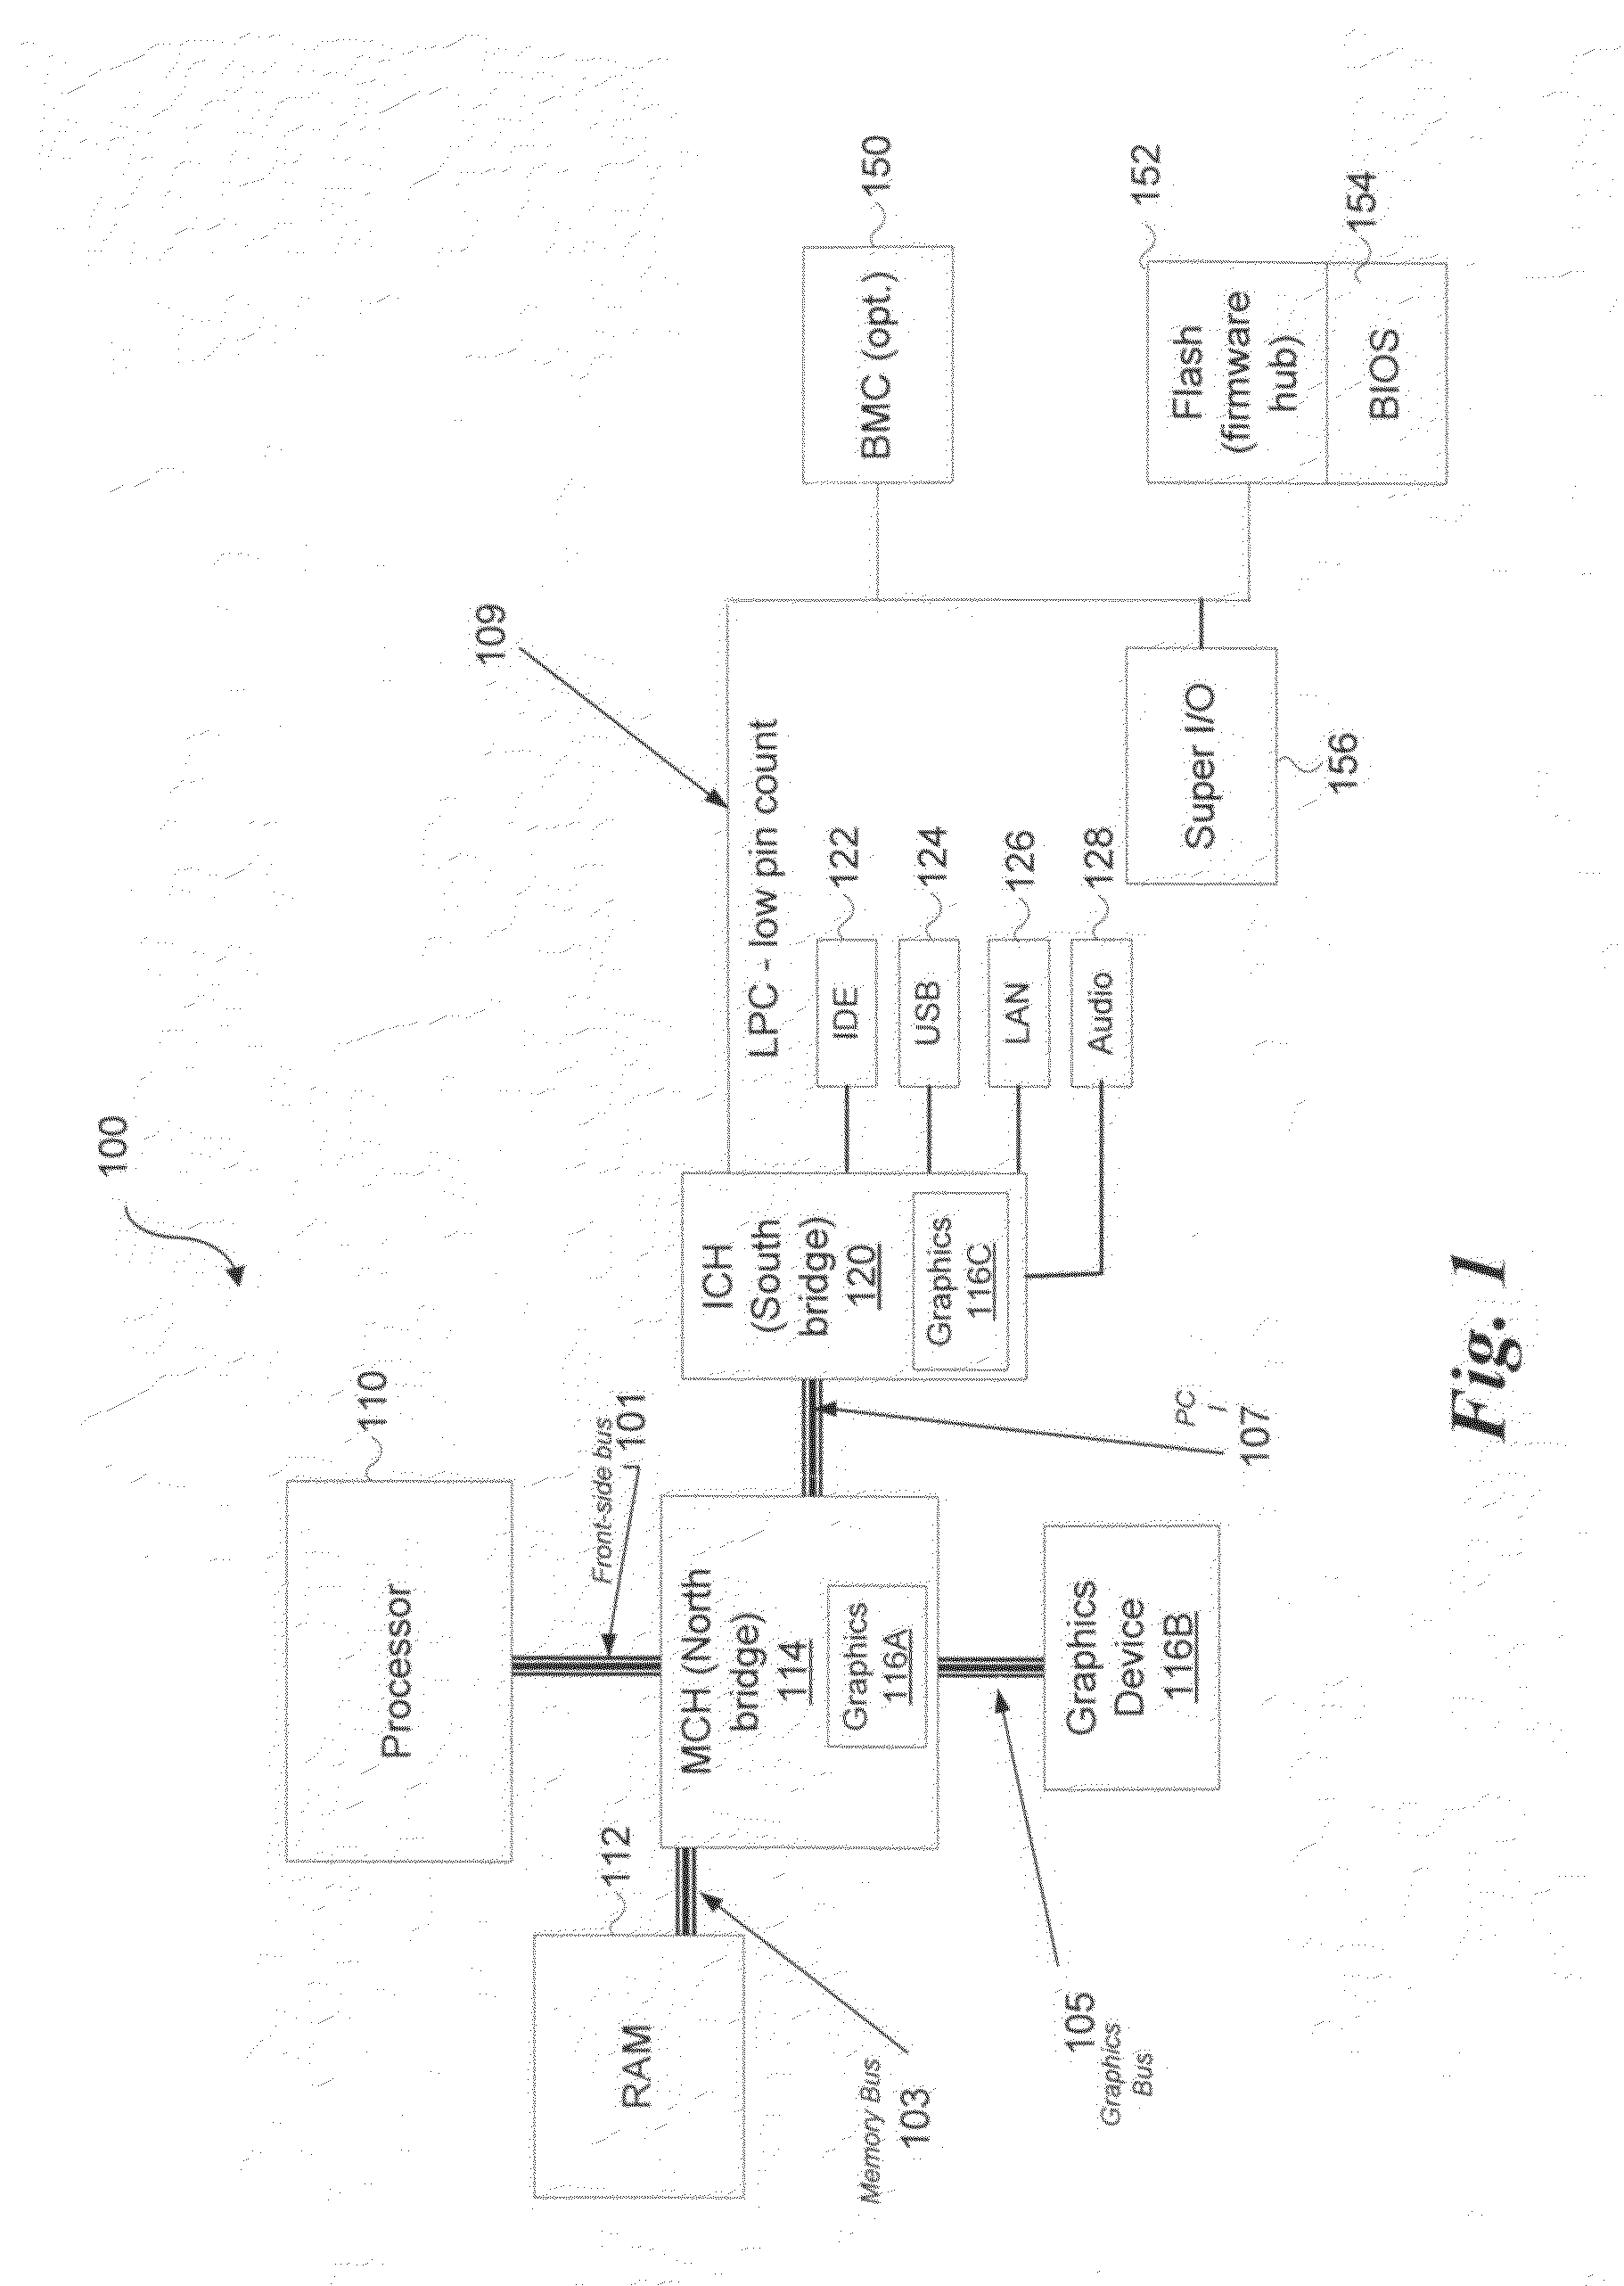 System and method to view crash dump information using a 2-d barcode